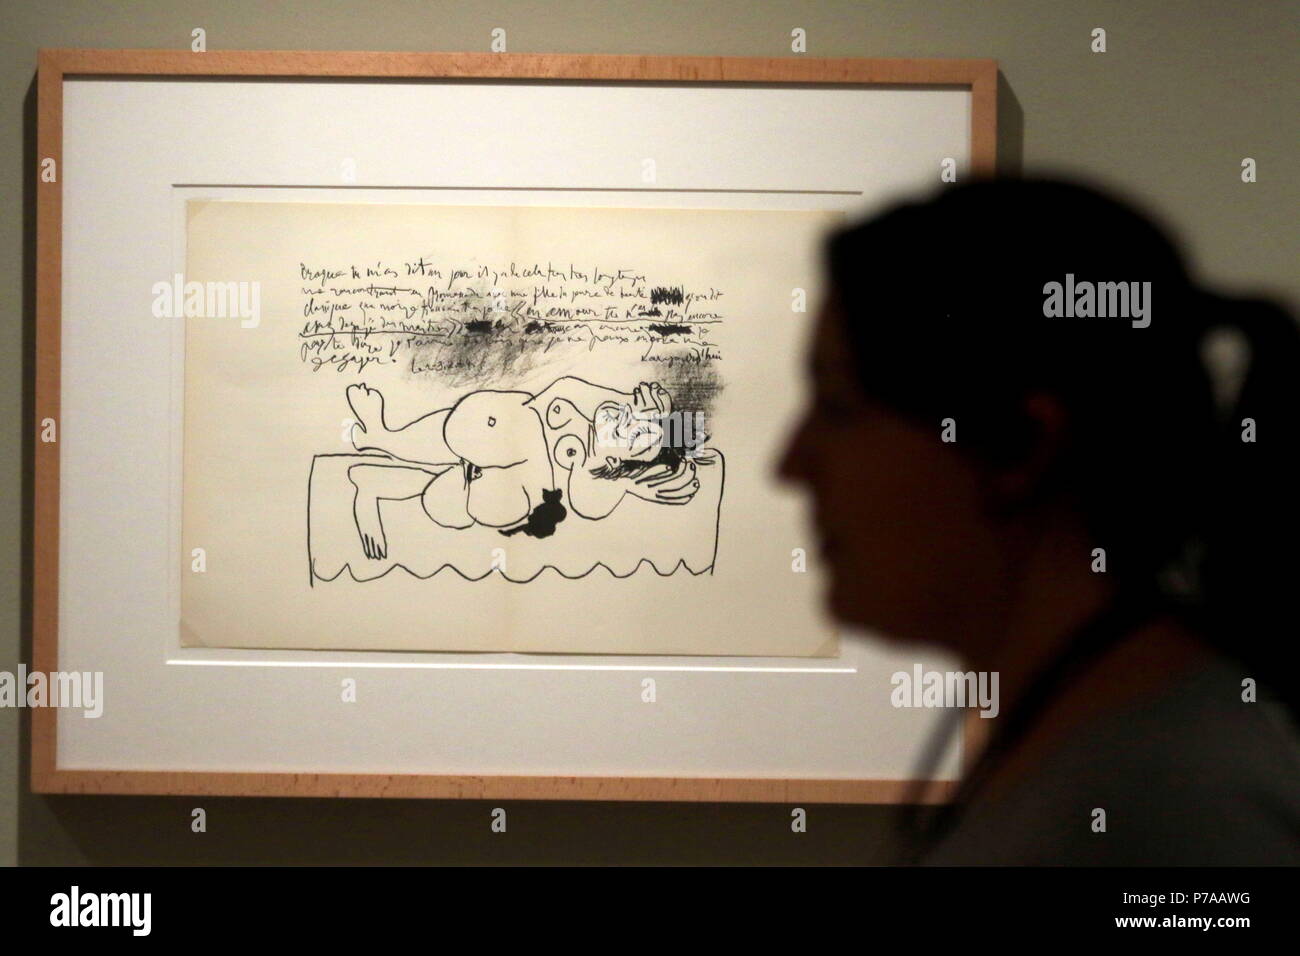 July 4, 2018 - July 4, 2018 (Malaga) The exhibition 'The Bestiary of Picasso' in the Birthplace of Pablo Ruiz Picasso. It consists of 54 works including drawings, illustrated books with original engravings, photographs, ceramics, lithographs, etchings and linocuts, among other techniques used by the painter from Malaga, which are part of the collections of the FundaciÃ³n Picasso Casa Natal.casso Museum in Malaga reveals the painter's relationship with animals.The bestiary of Picasso 'represents a selection of animals that went through the life of the artist and immortalized in hundreds of work Stock Photo